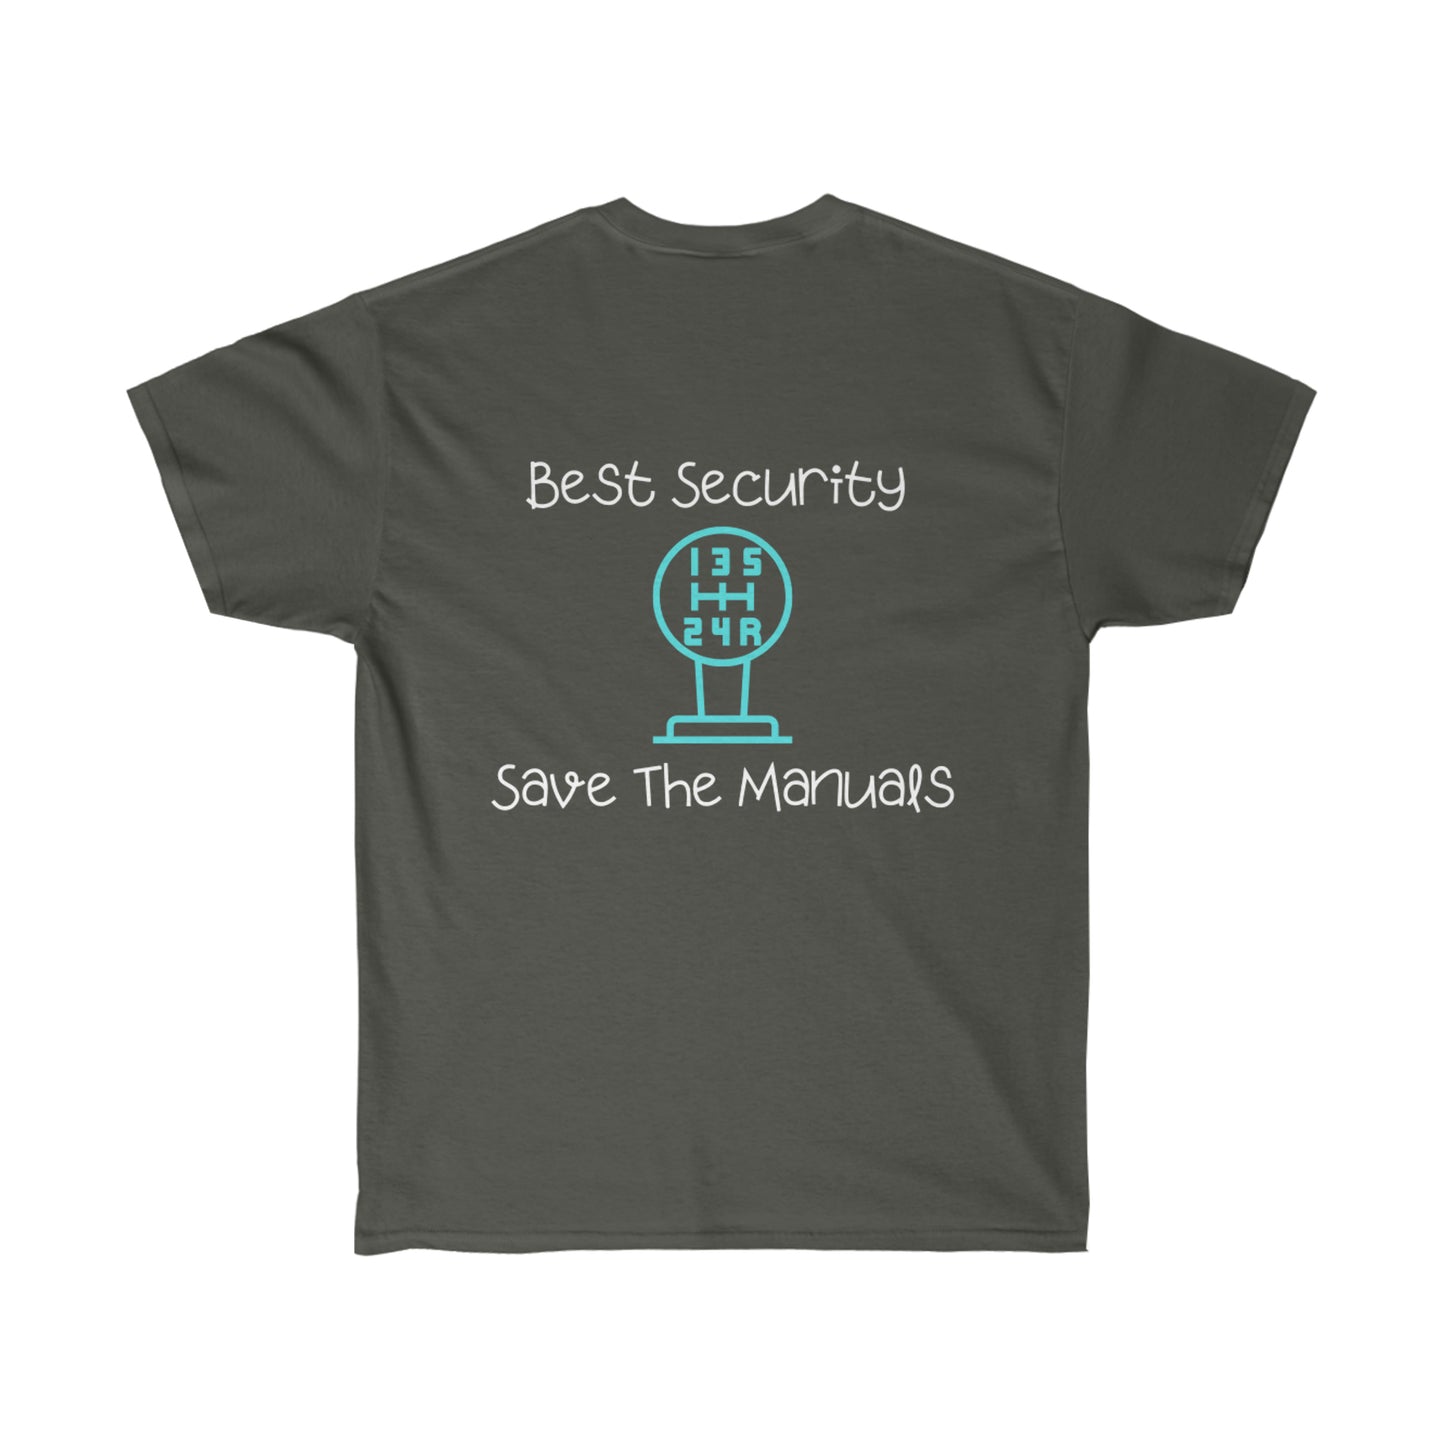 Save the Manuals Cotton Tee